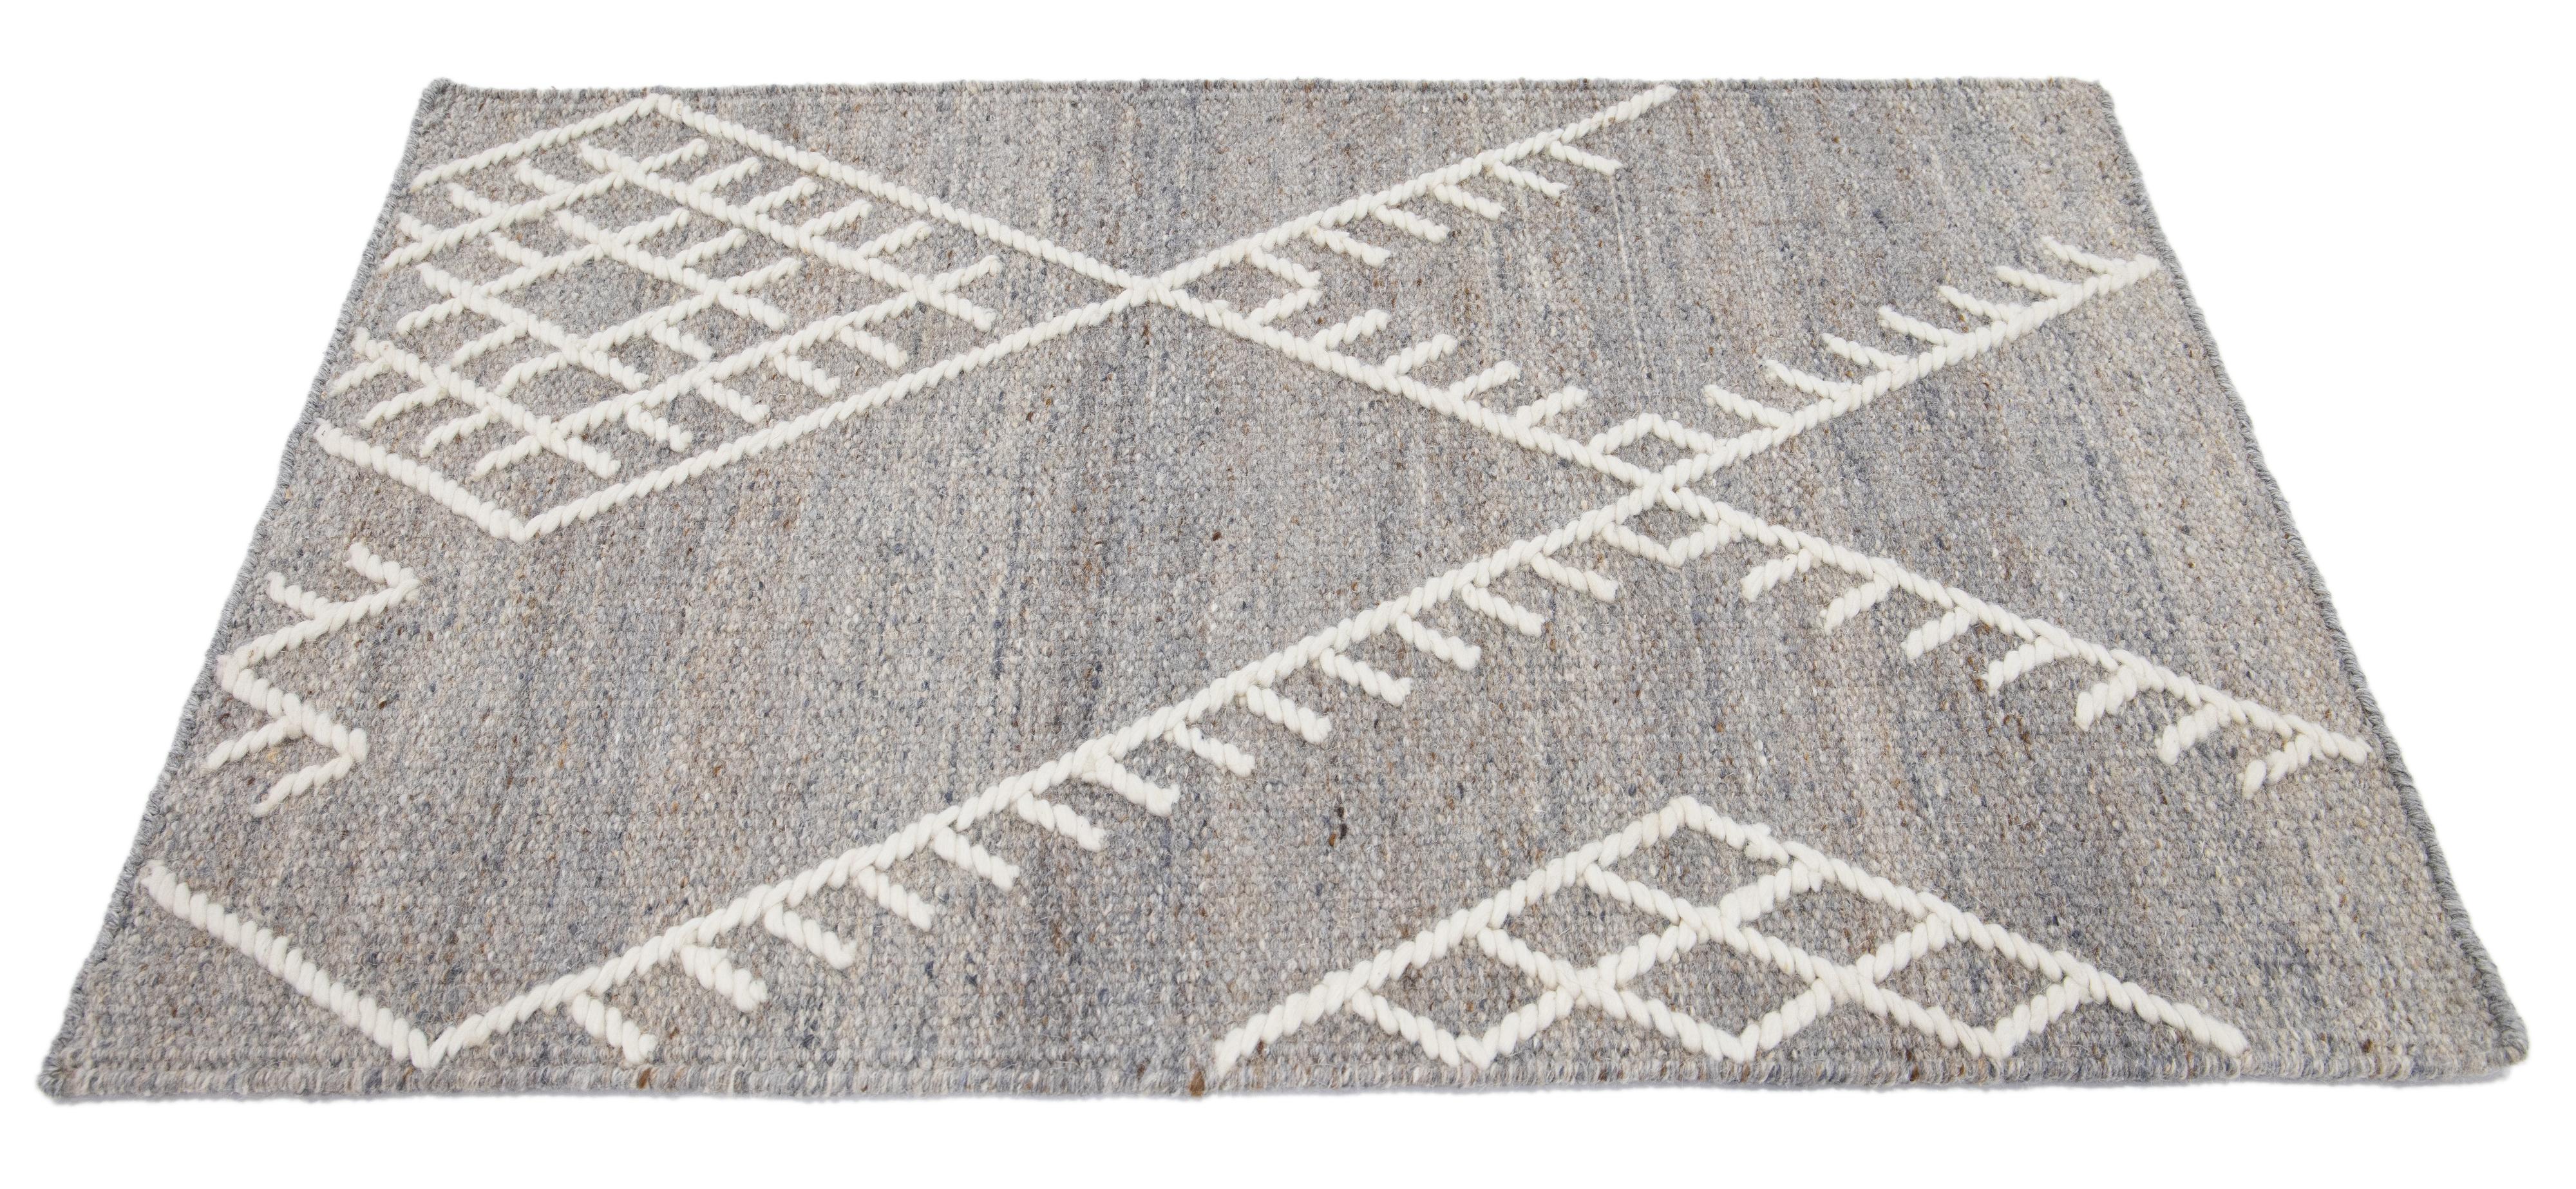 Apadana's Nantucket Collection wool custom rug. Custom sizes and colors made-to-order. 

Material: Wool 
Techniques: Flatweave
Style: Geometric-Coastal
Lead time: Approx. 15-16 wks available 
Colors: As shown, other custom colors are